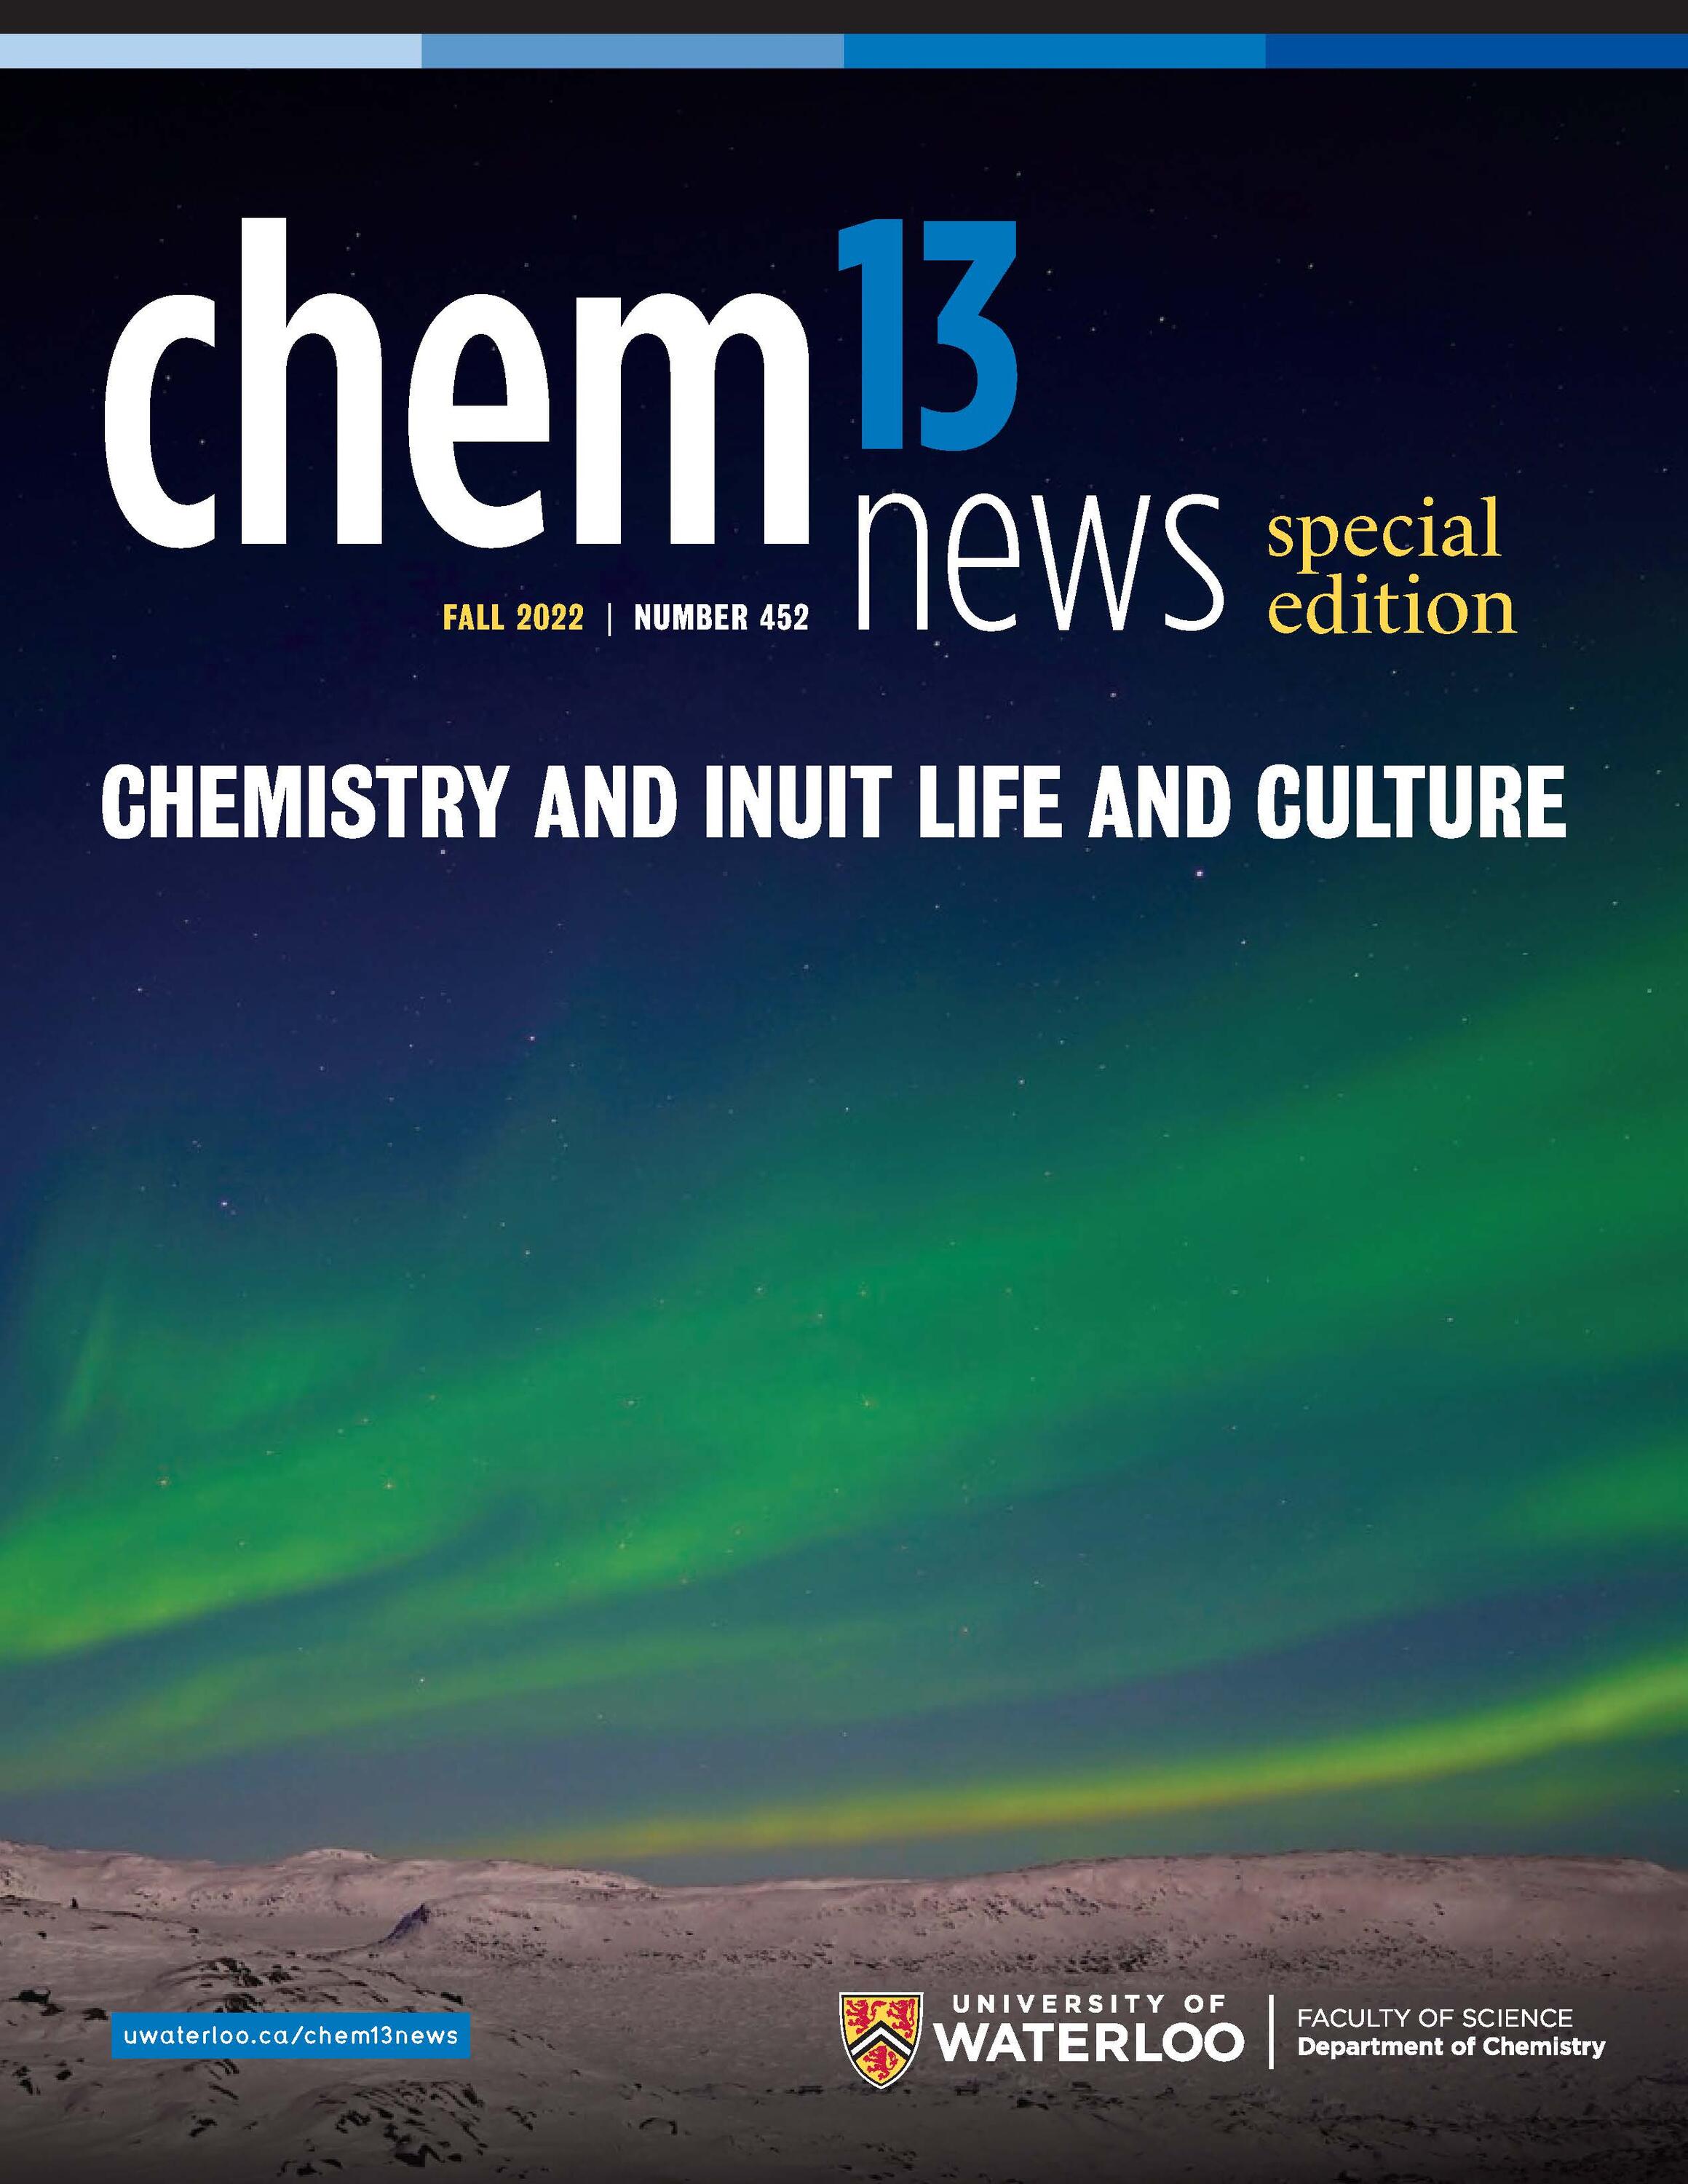 Chem 13 News Fall 2022 Special Edition Chemistry and Inuit Life and Culture